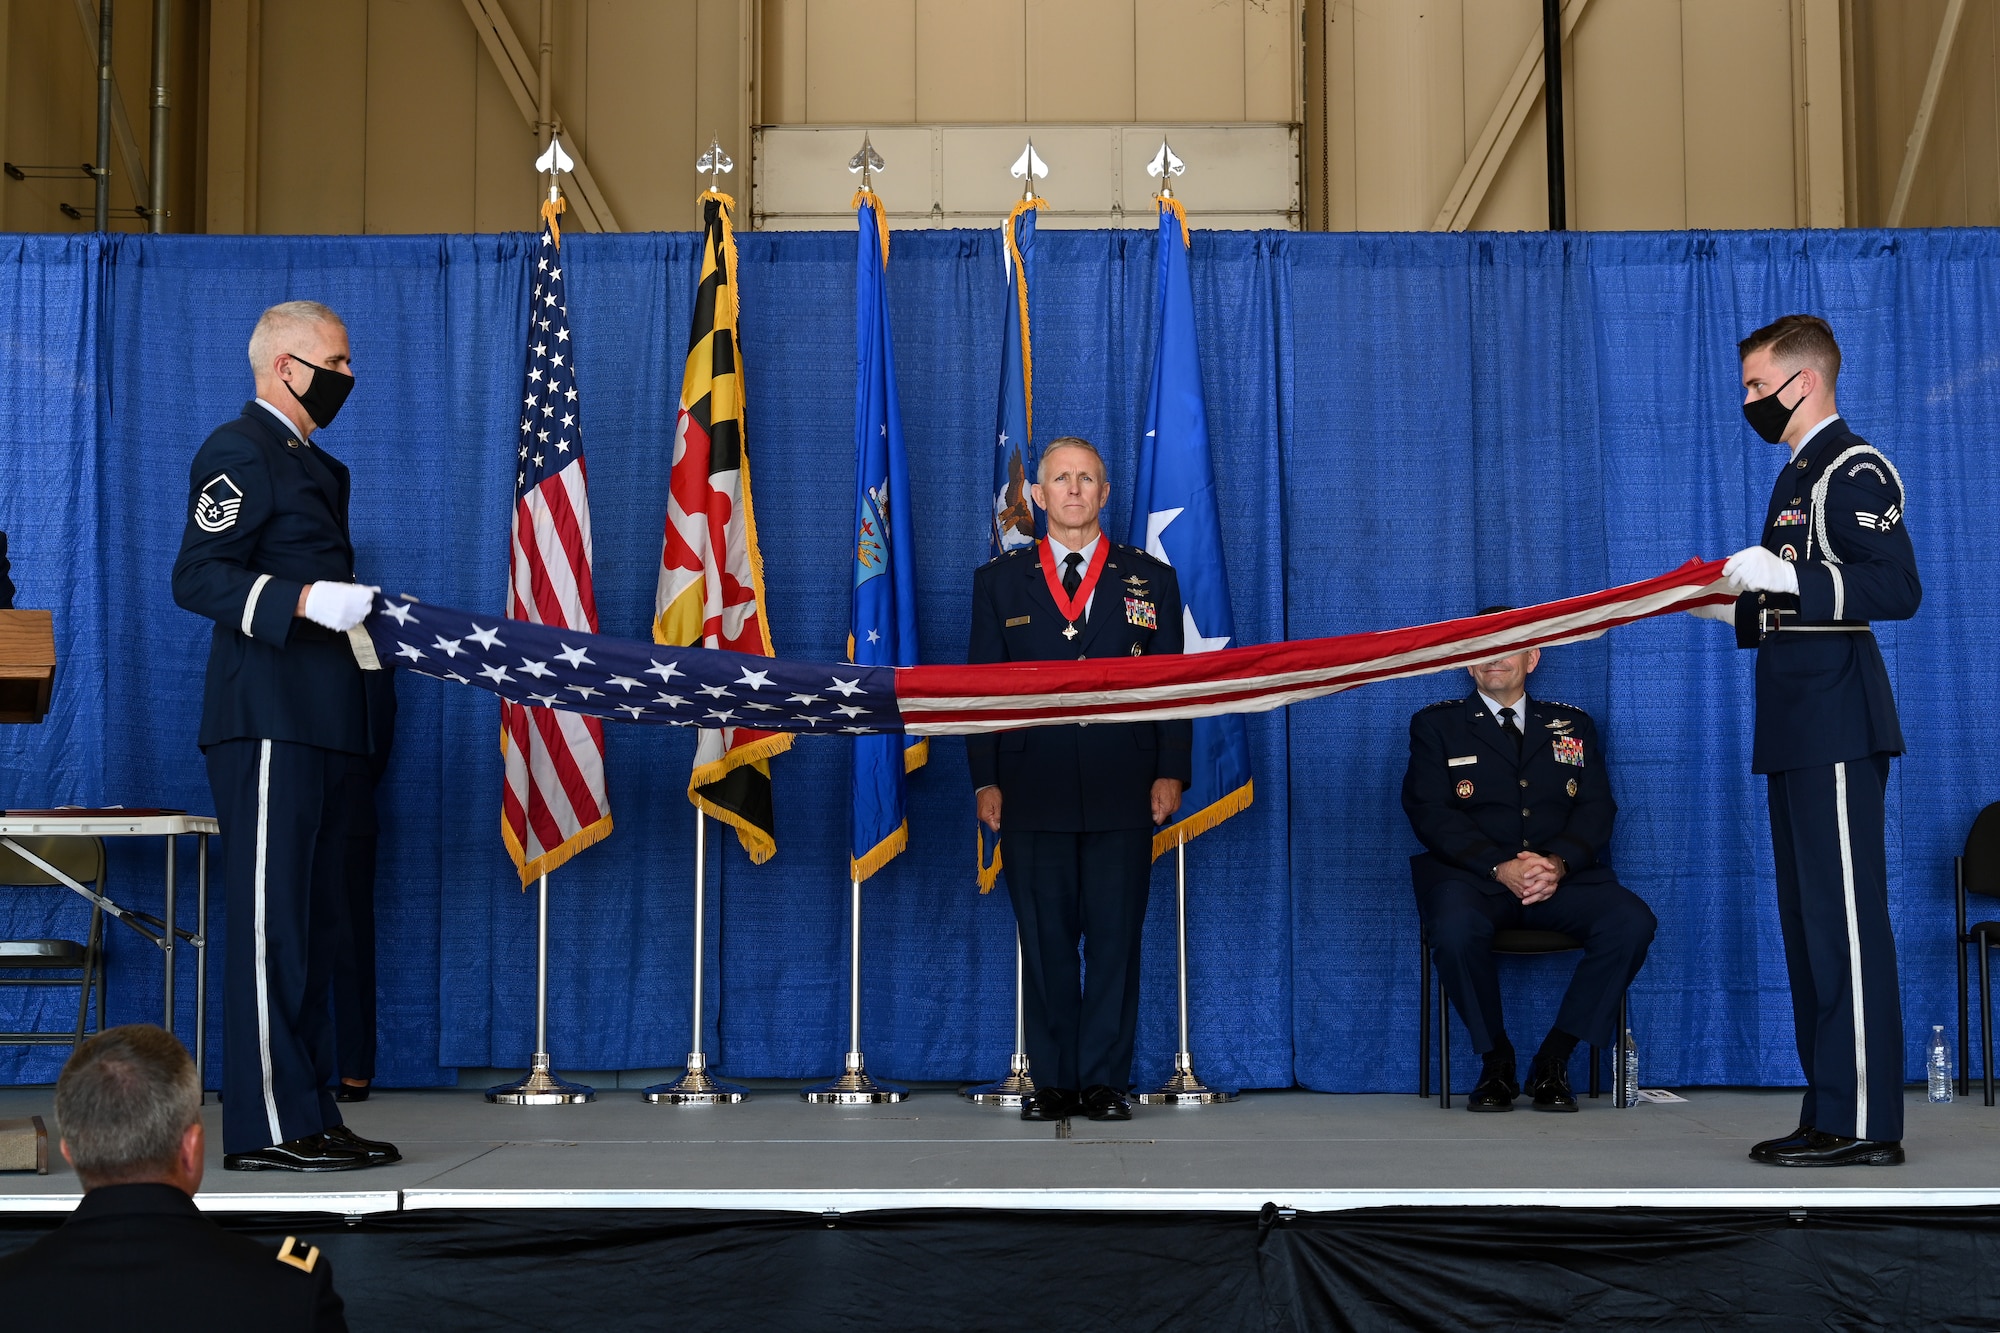 Members from the Maryland National Guard Honor Guard Team fold a flag that was presented to Maj. Gen. Paul C. Maas, Jr., the National Guard assistant to the commander of U.S. Cyber Command, director of the National Security Agency, and Central Security Service chief during his retirement ceremony, Oct. 3, 2020 at the 175th Wing, Maryland Air National Guard, Middle River, Md. Maas retired after 42 years of service in the United States Air Force. (U.S. Air National Guard photo by Tech. Sgt. Enjoli Saunders)